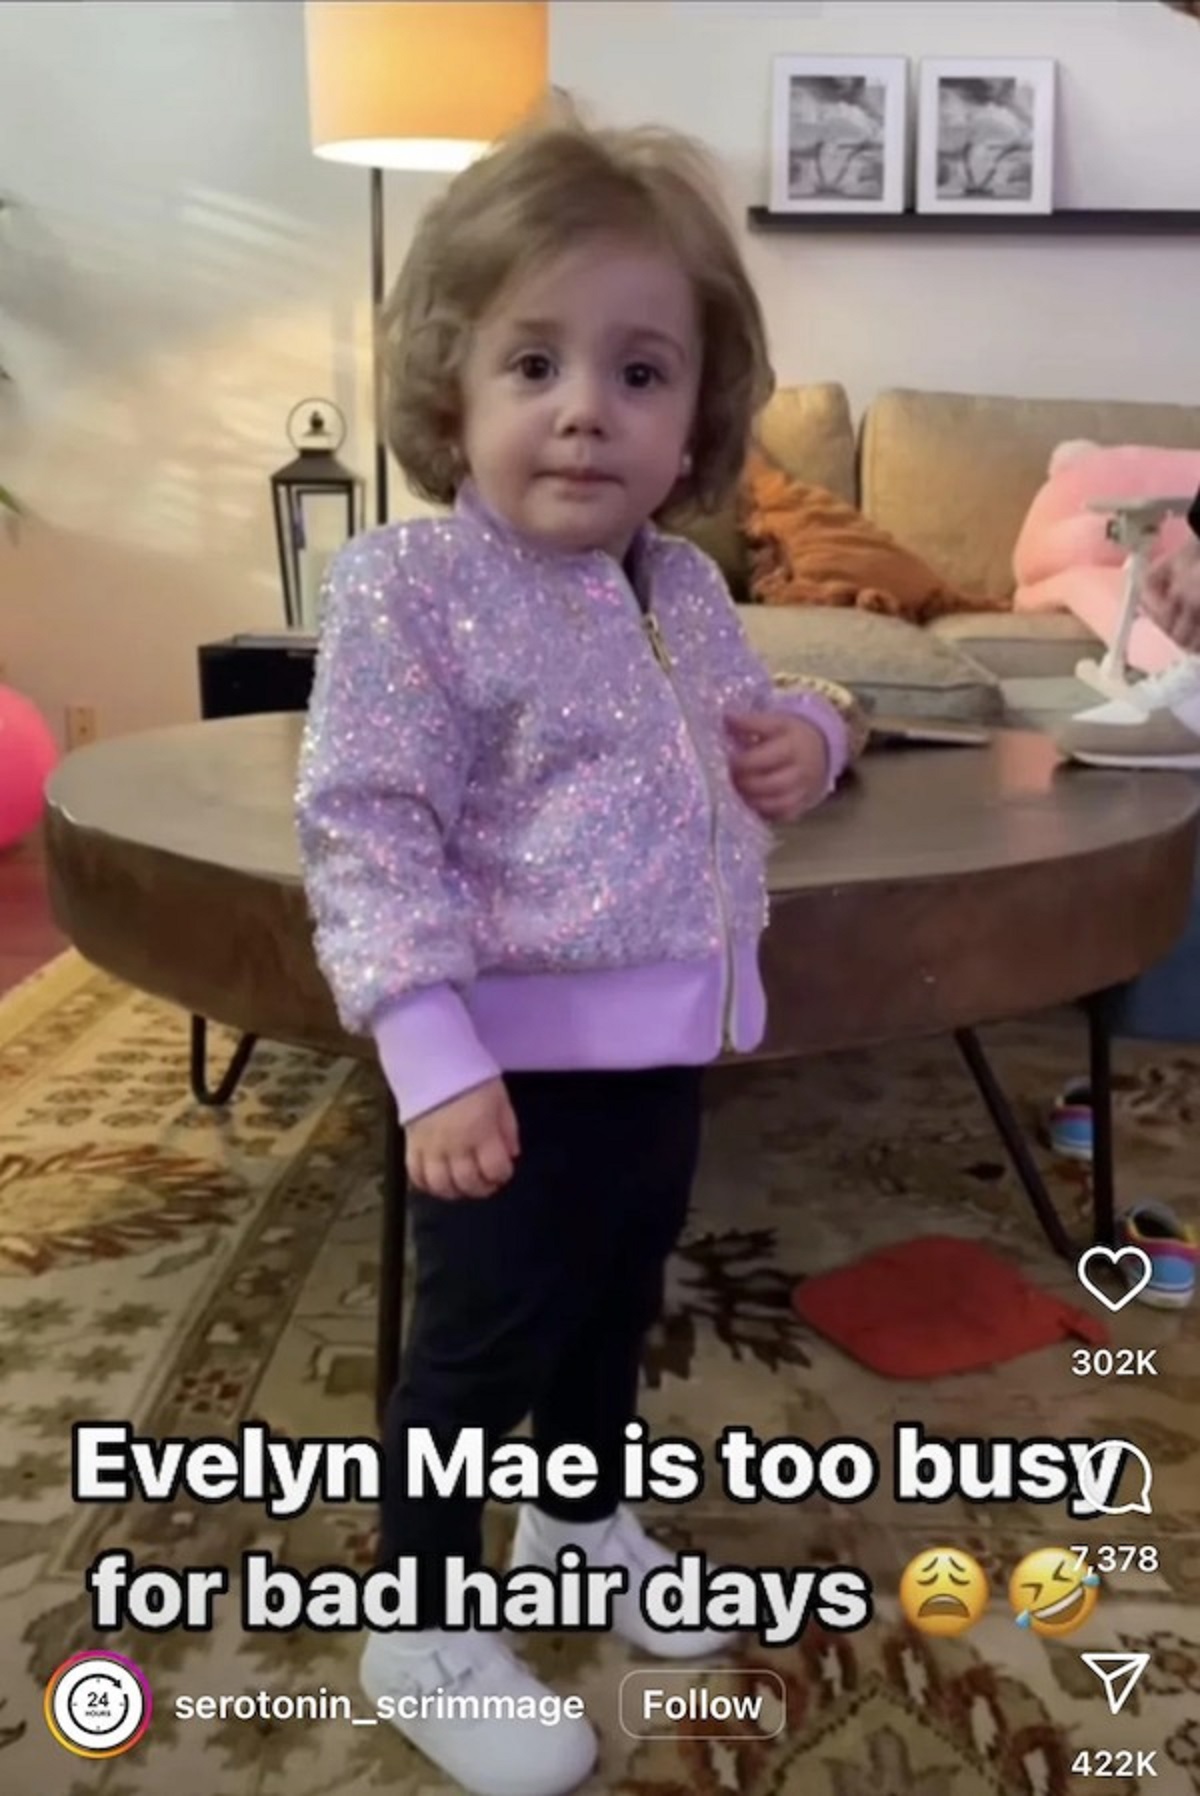 toddler with golden girls hair - Ve Evelyn Mae is too busy for bad hair days 7,378 24 serotonin_scrimmage